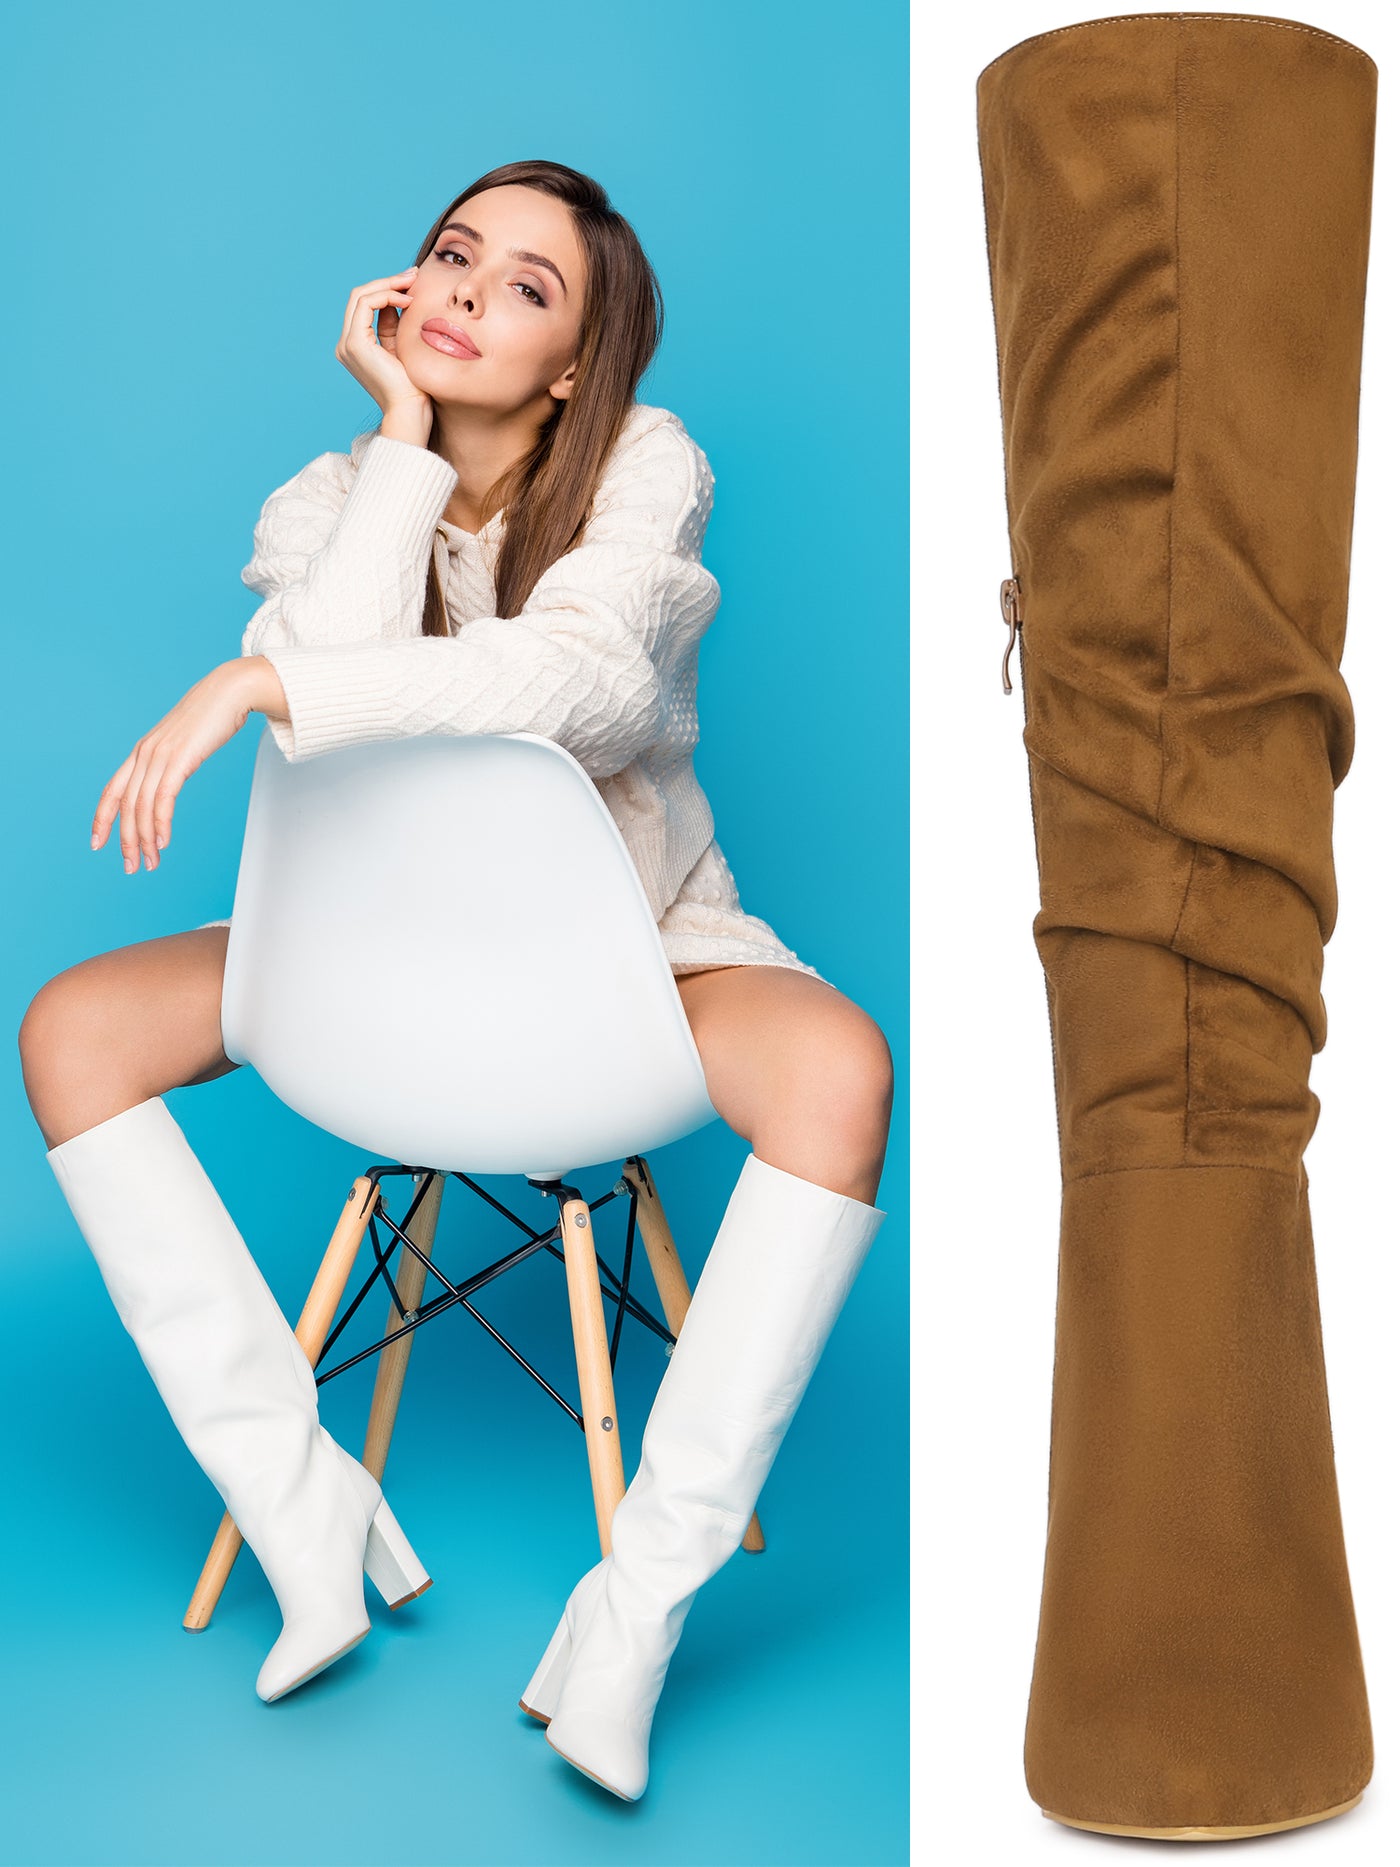 Allegra K Slouchy Pointed Toe Chunky Heel Knee High Boots